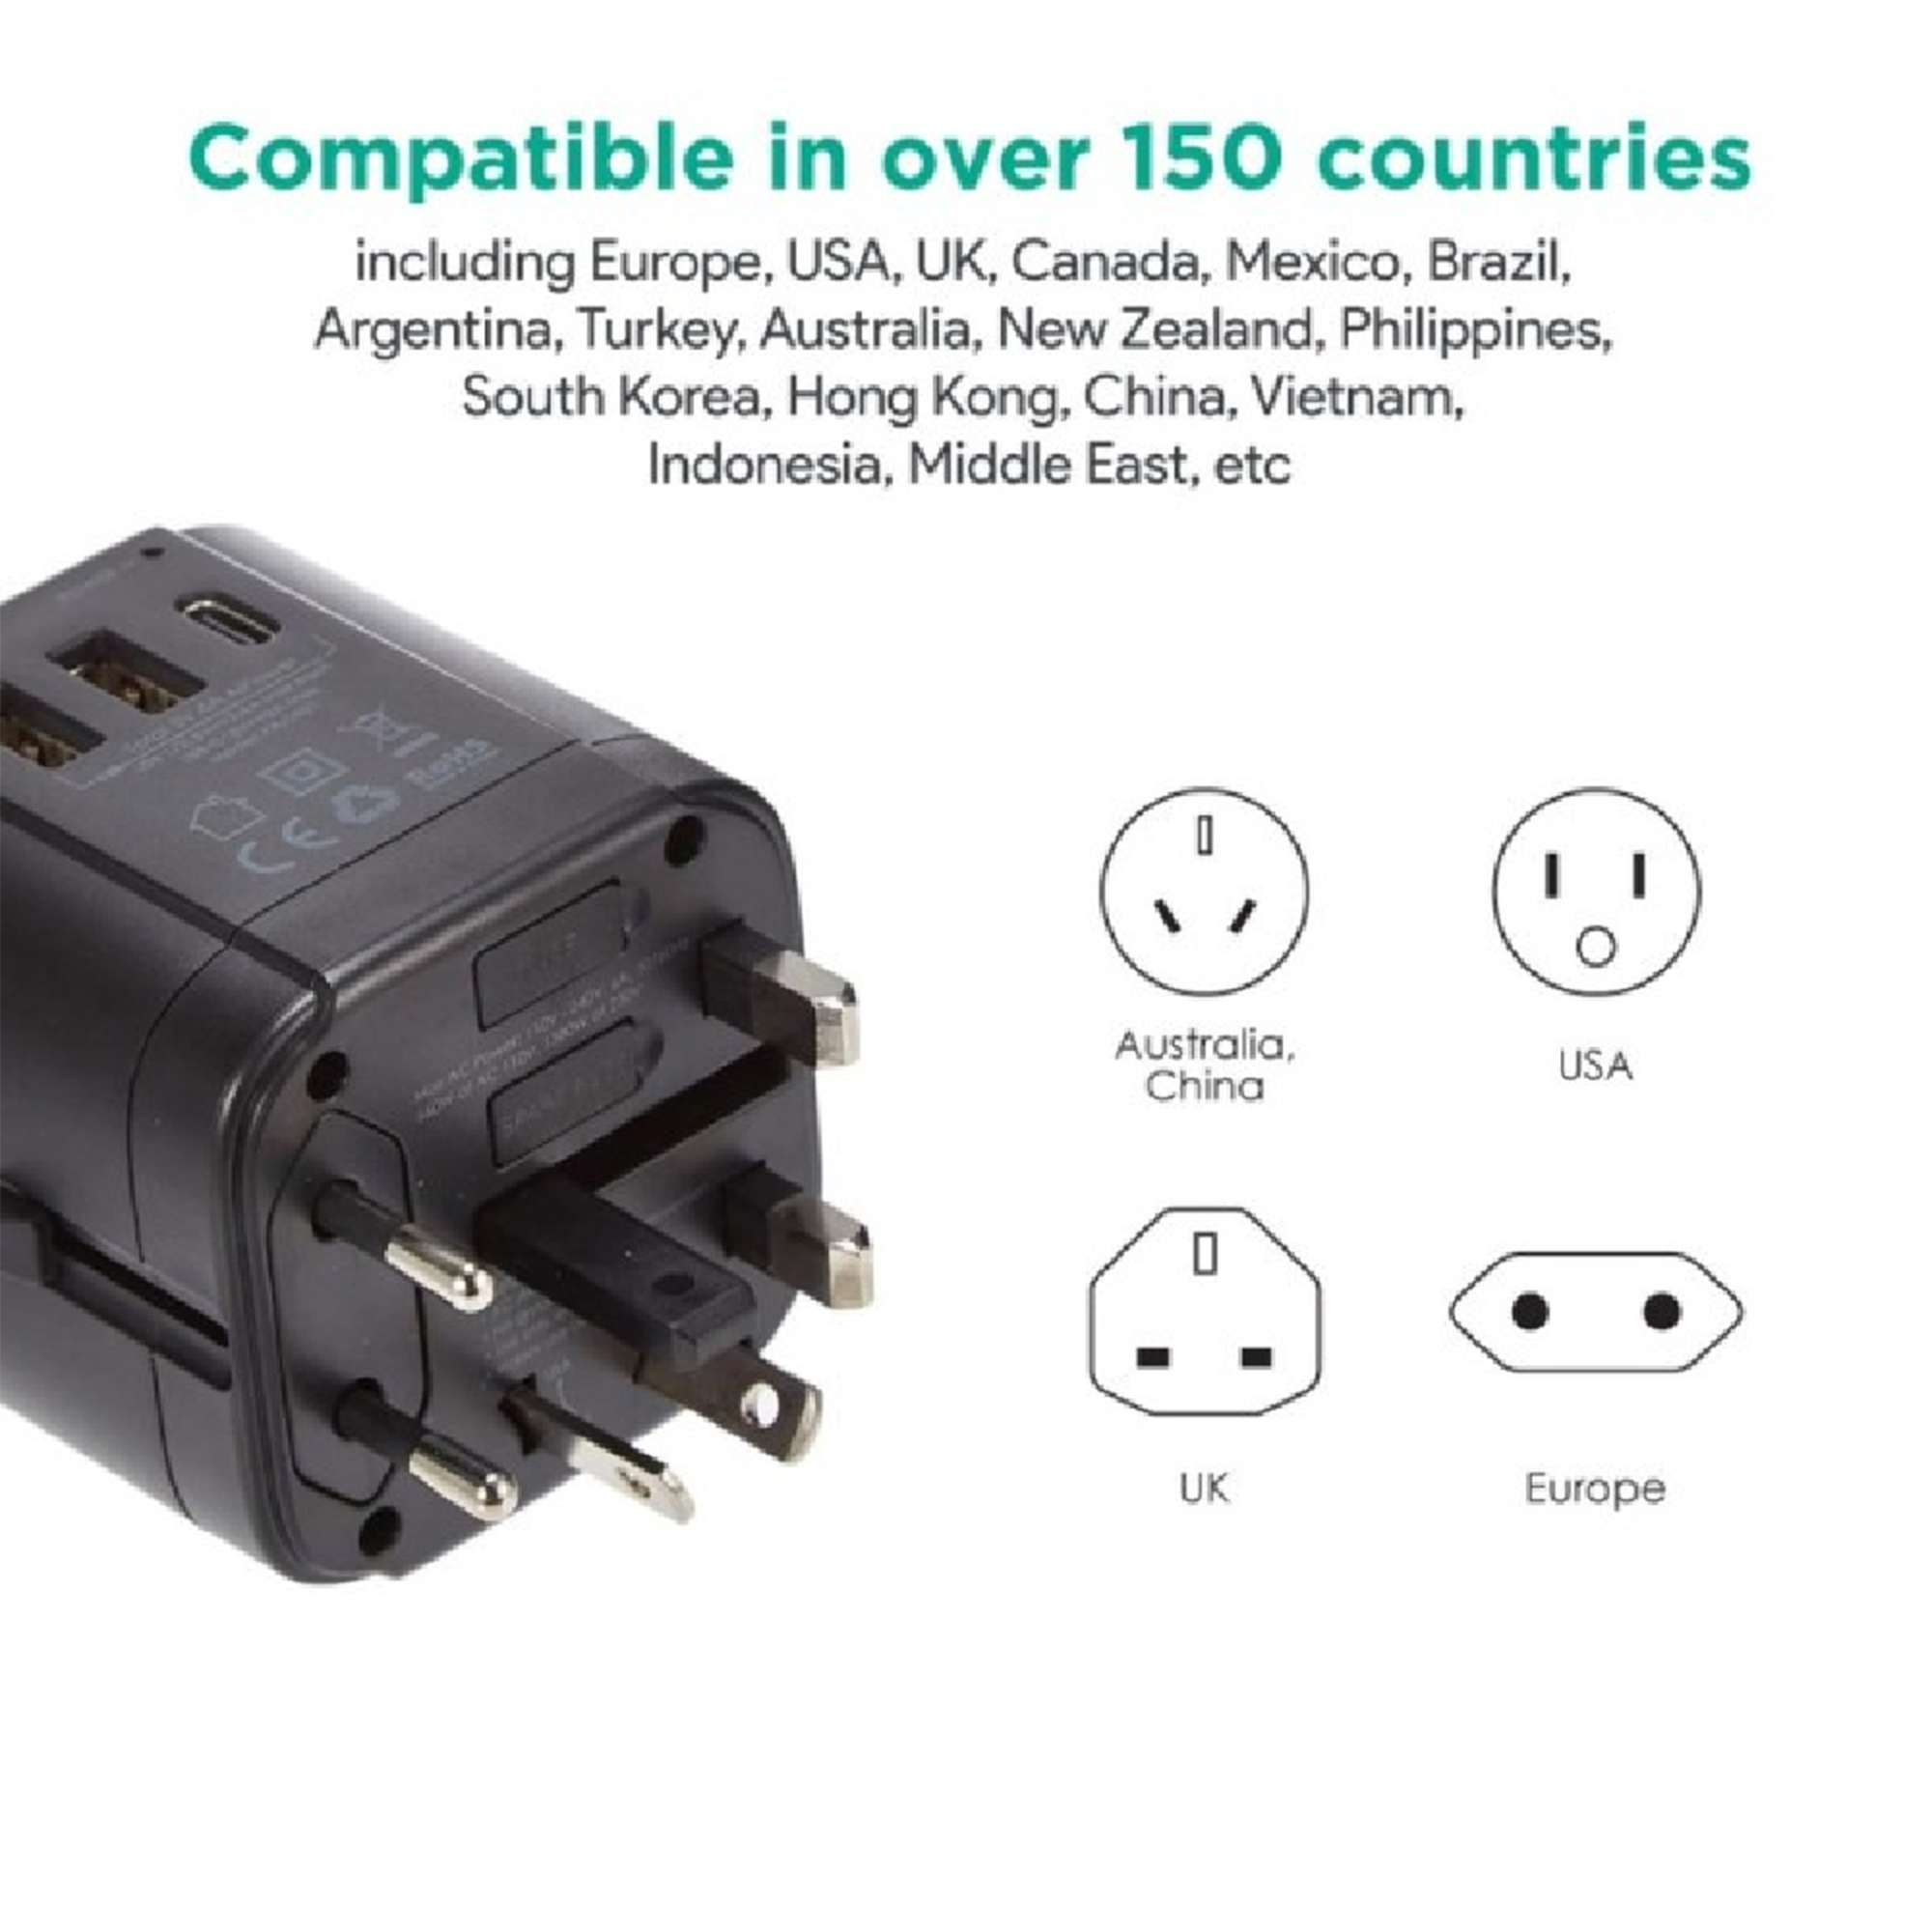 Aukey-PA-TA01-Universal-Travel-Adapter-With-USB-C-and-USB-A-Ports-Black-Description-1